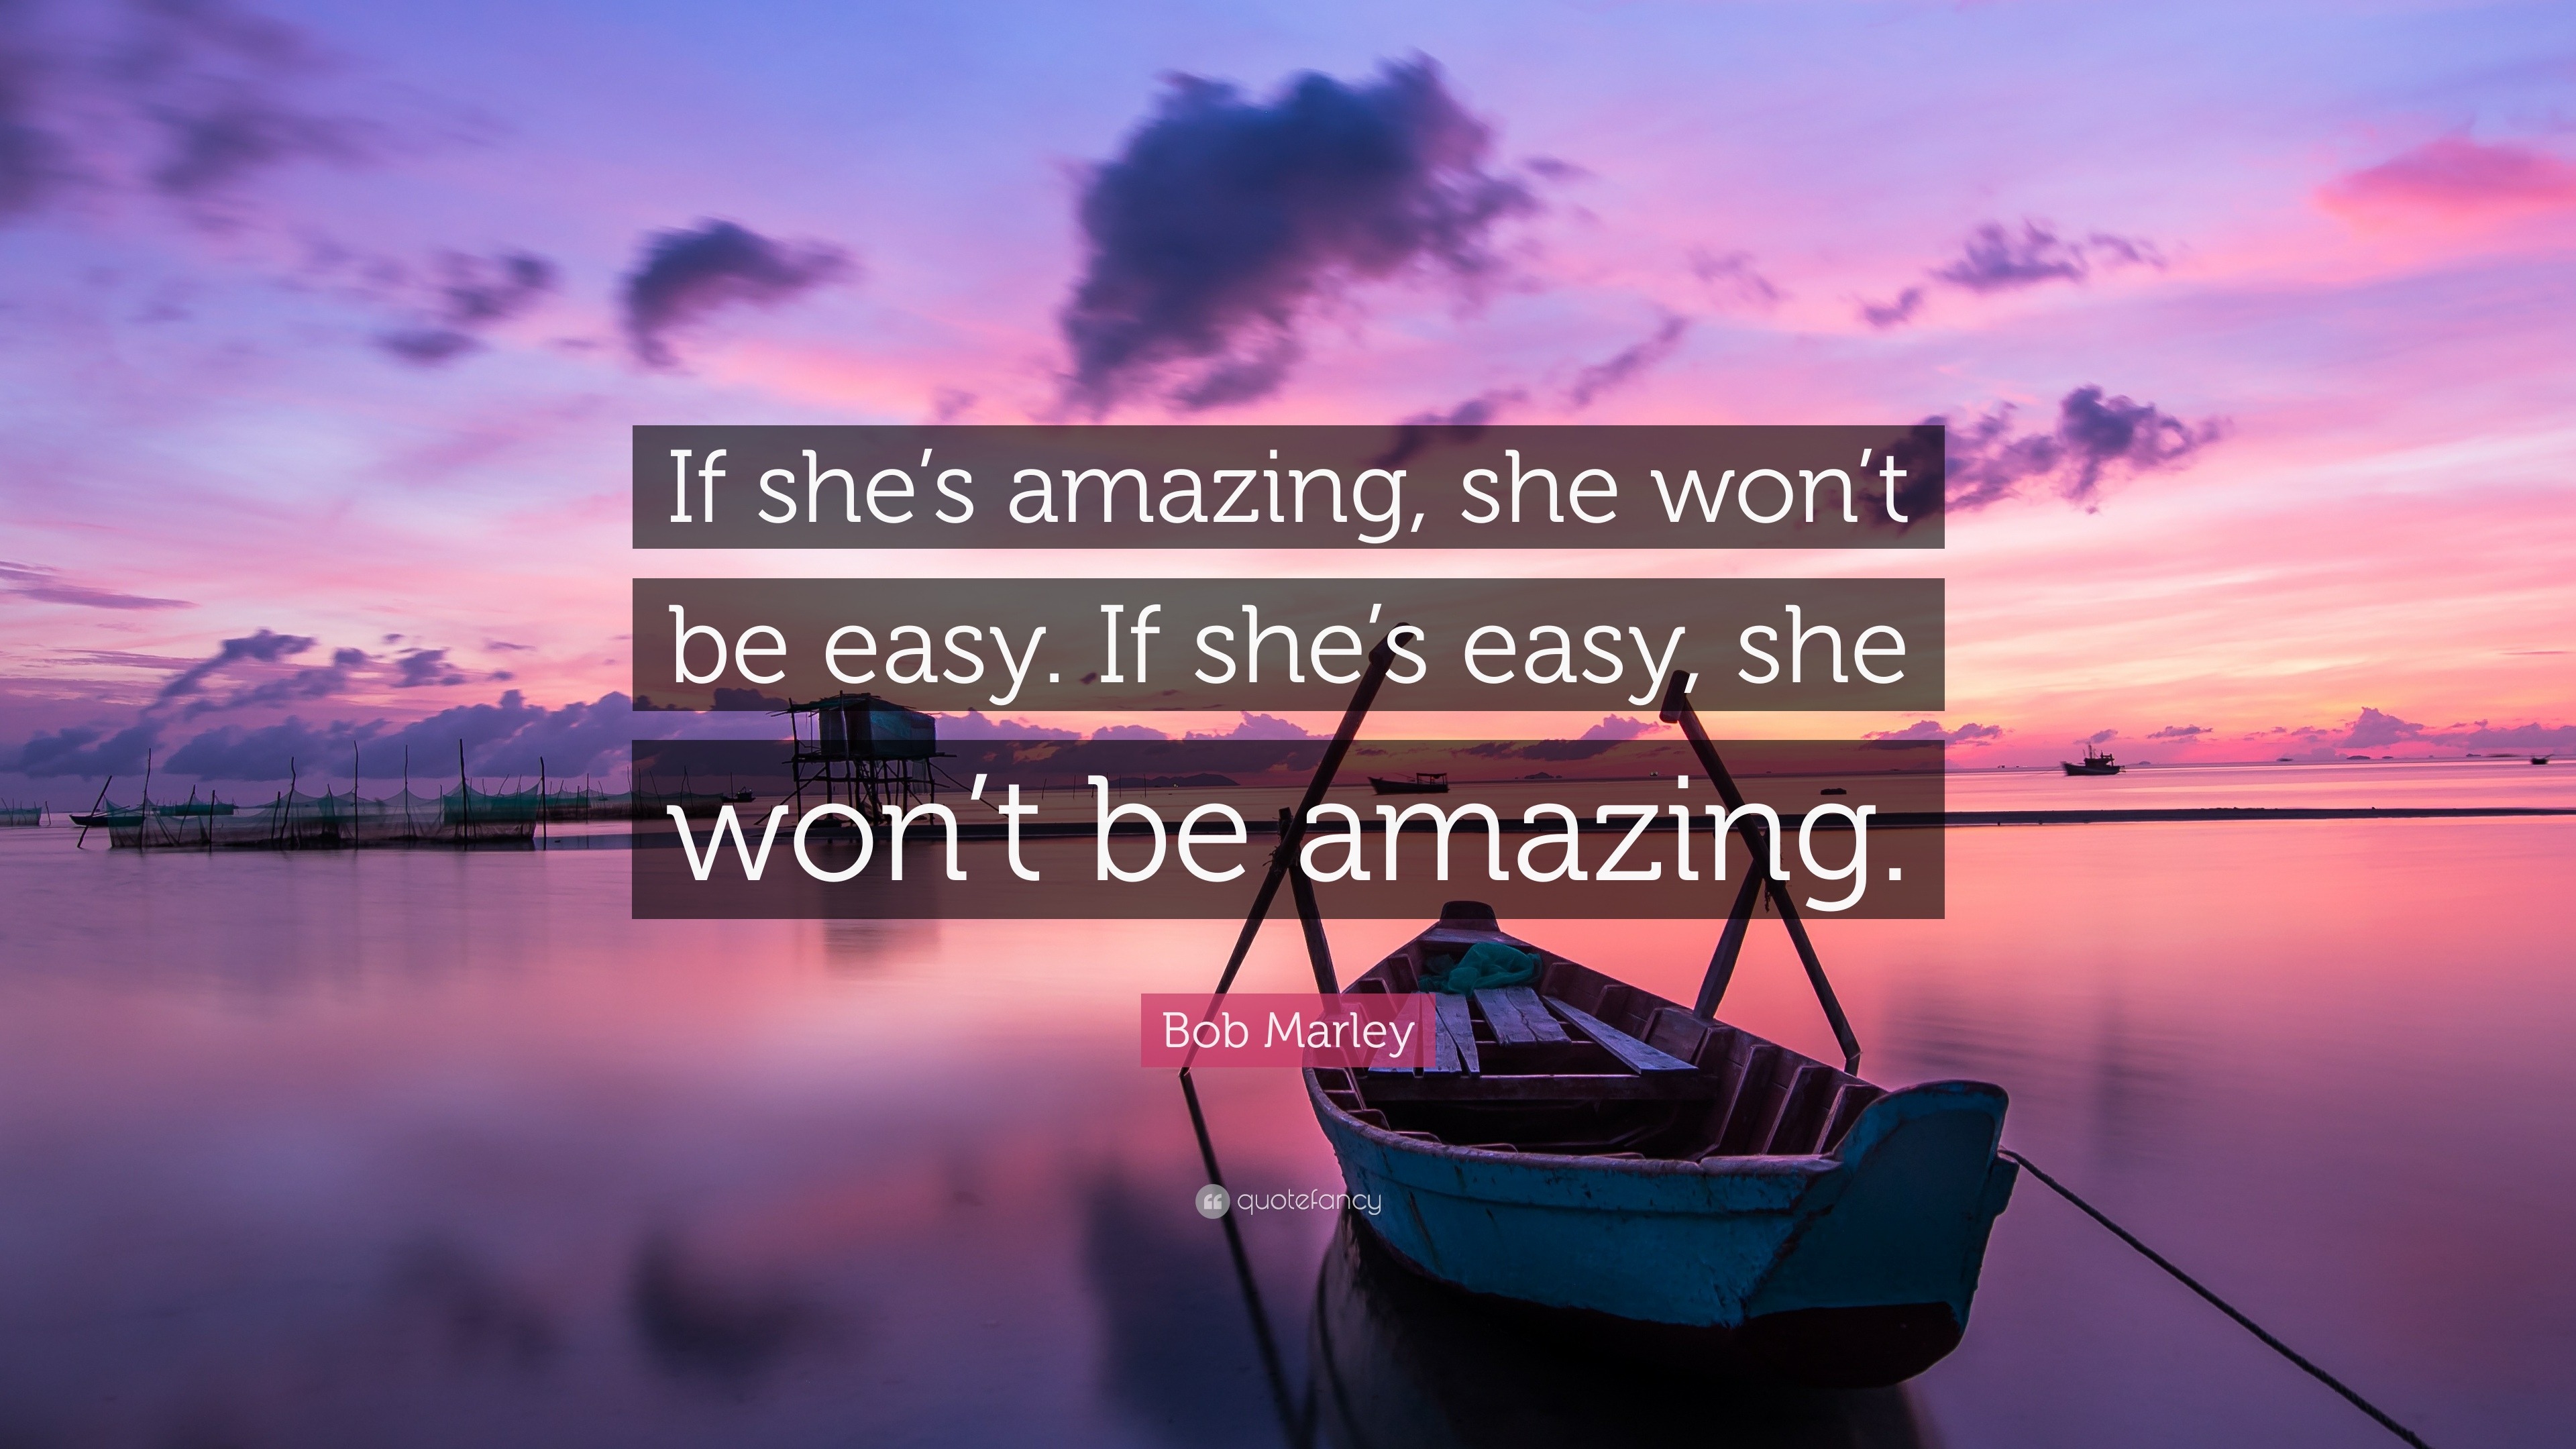 1721889 Bob Marley Quote If She S Amazing She Won T Be Easy If She S Easy 